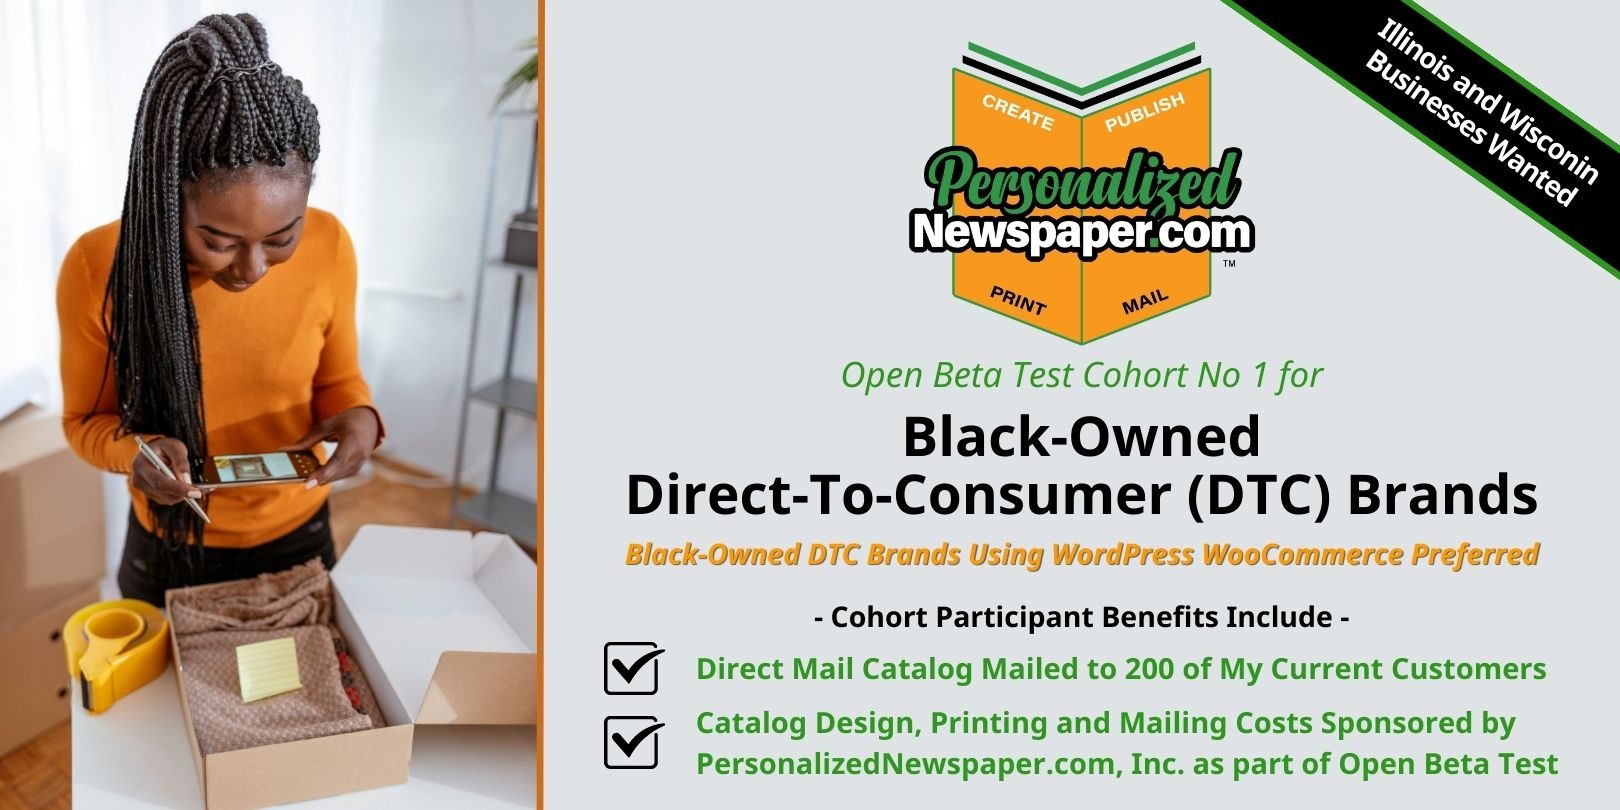 PersonalizedNewspaper.com Open Beta Cohort No 1 for Black-Owned Direct-To-Consumer (DTC) Brands